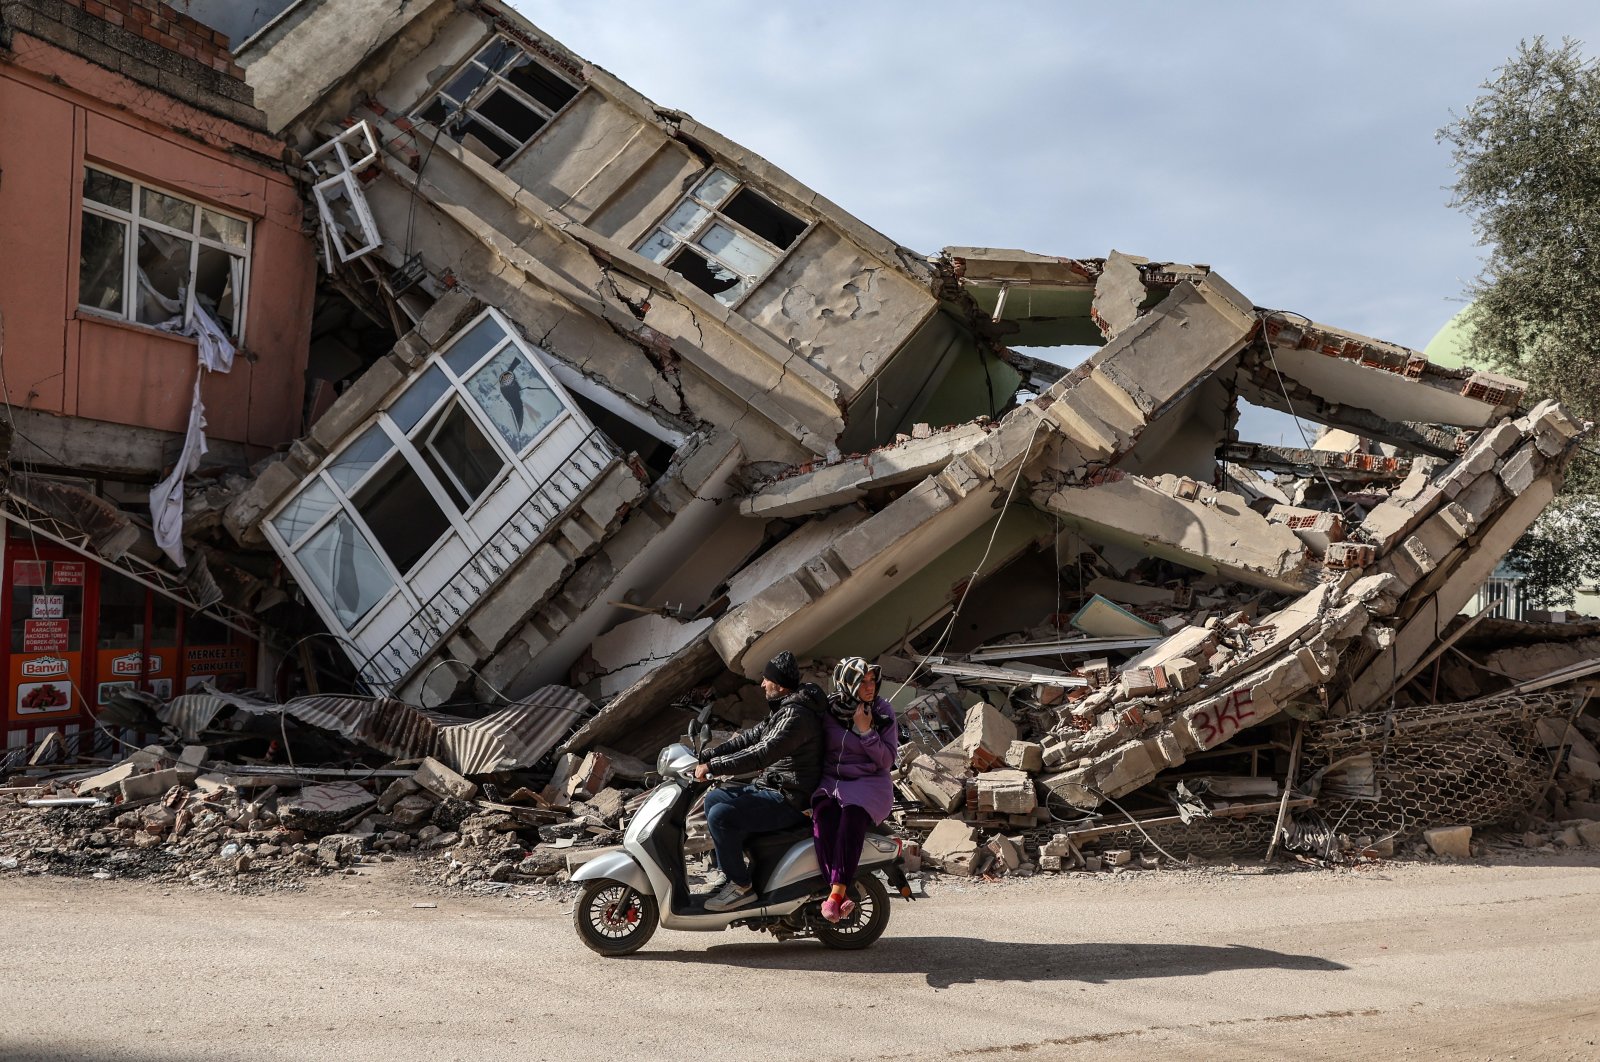 People ride a scooter in front of a collapsed building after the powerful earthquake in Adıyaman, Türkiye, Feb. 19, 2023. (EPA Photo)